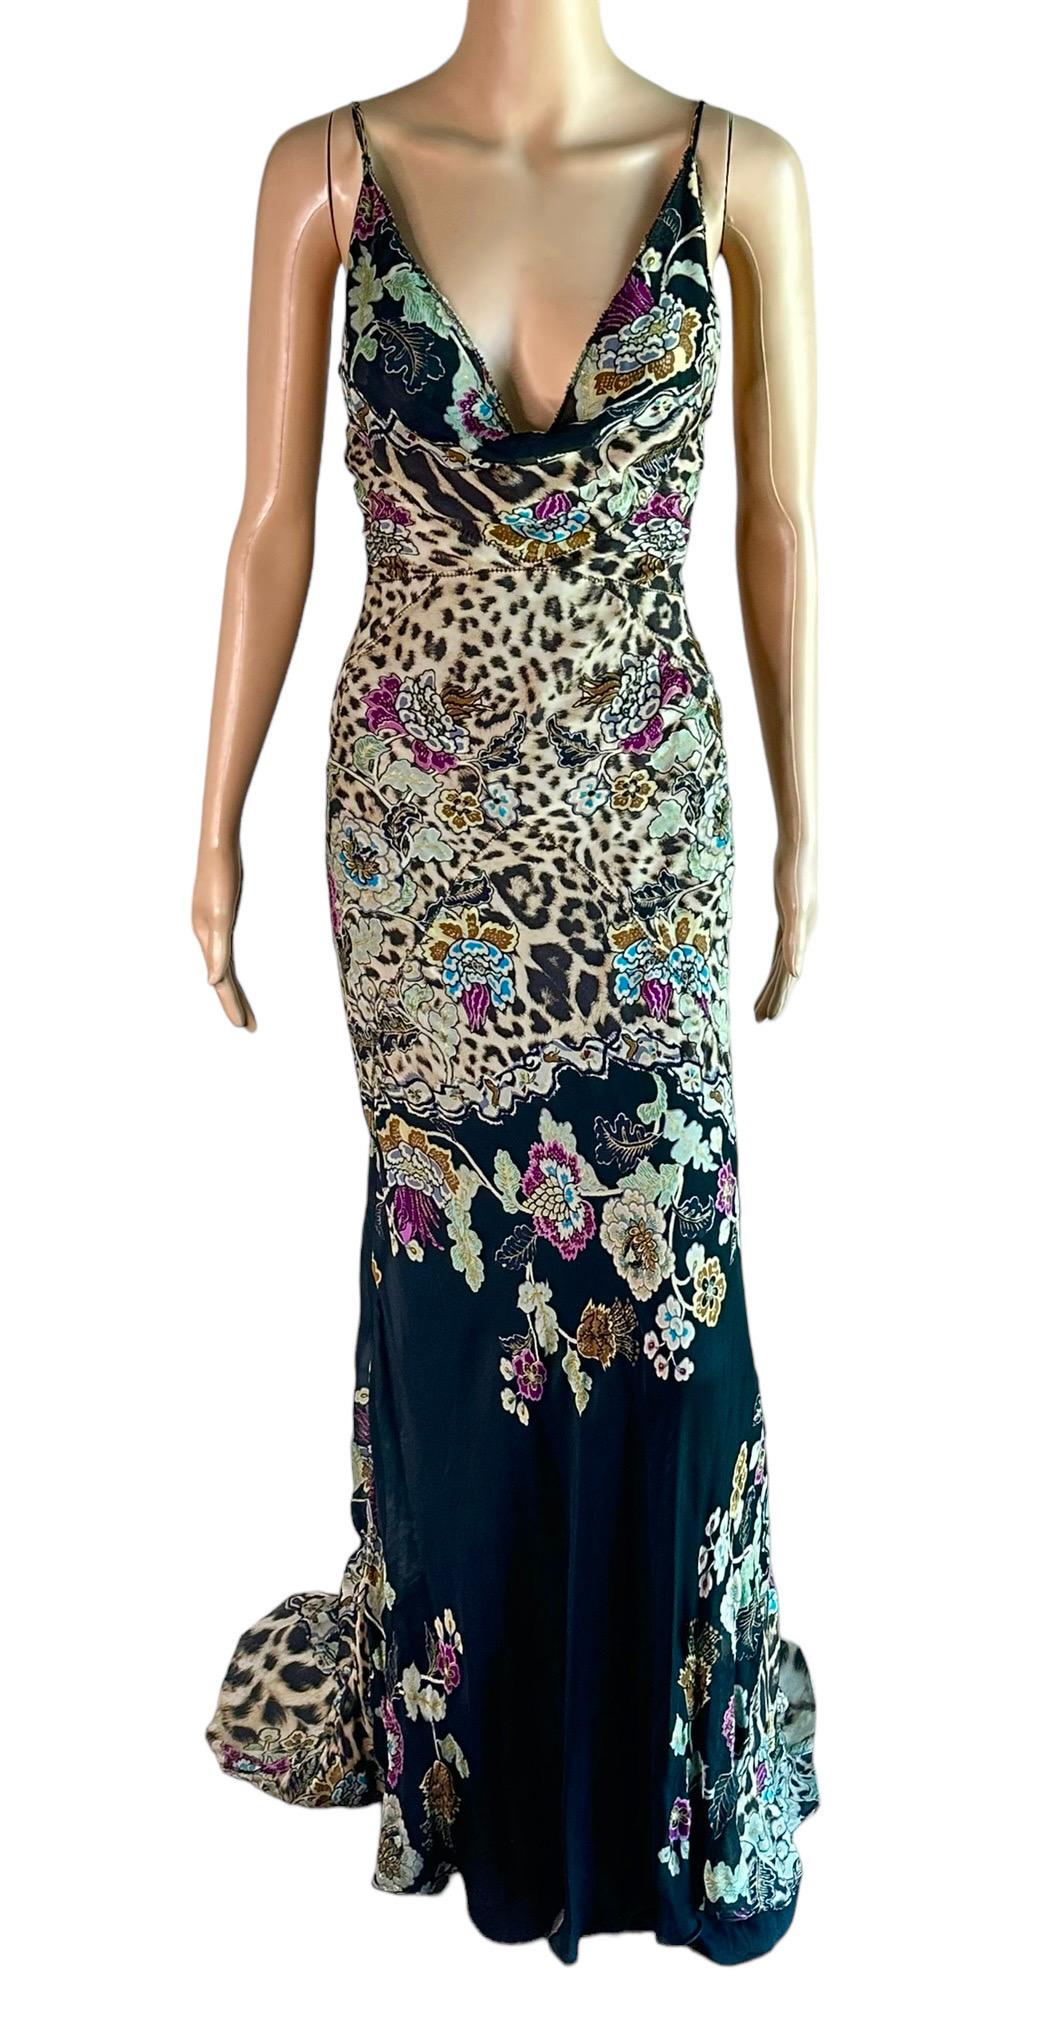 Roberto Cavalli S/S 2003 Chinoiserie Print Silk Train Maxi Evening Dress Gown For Sale 8